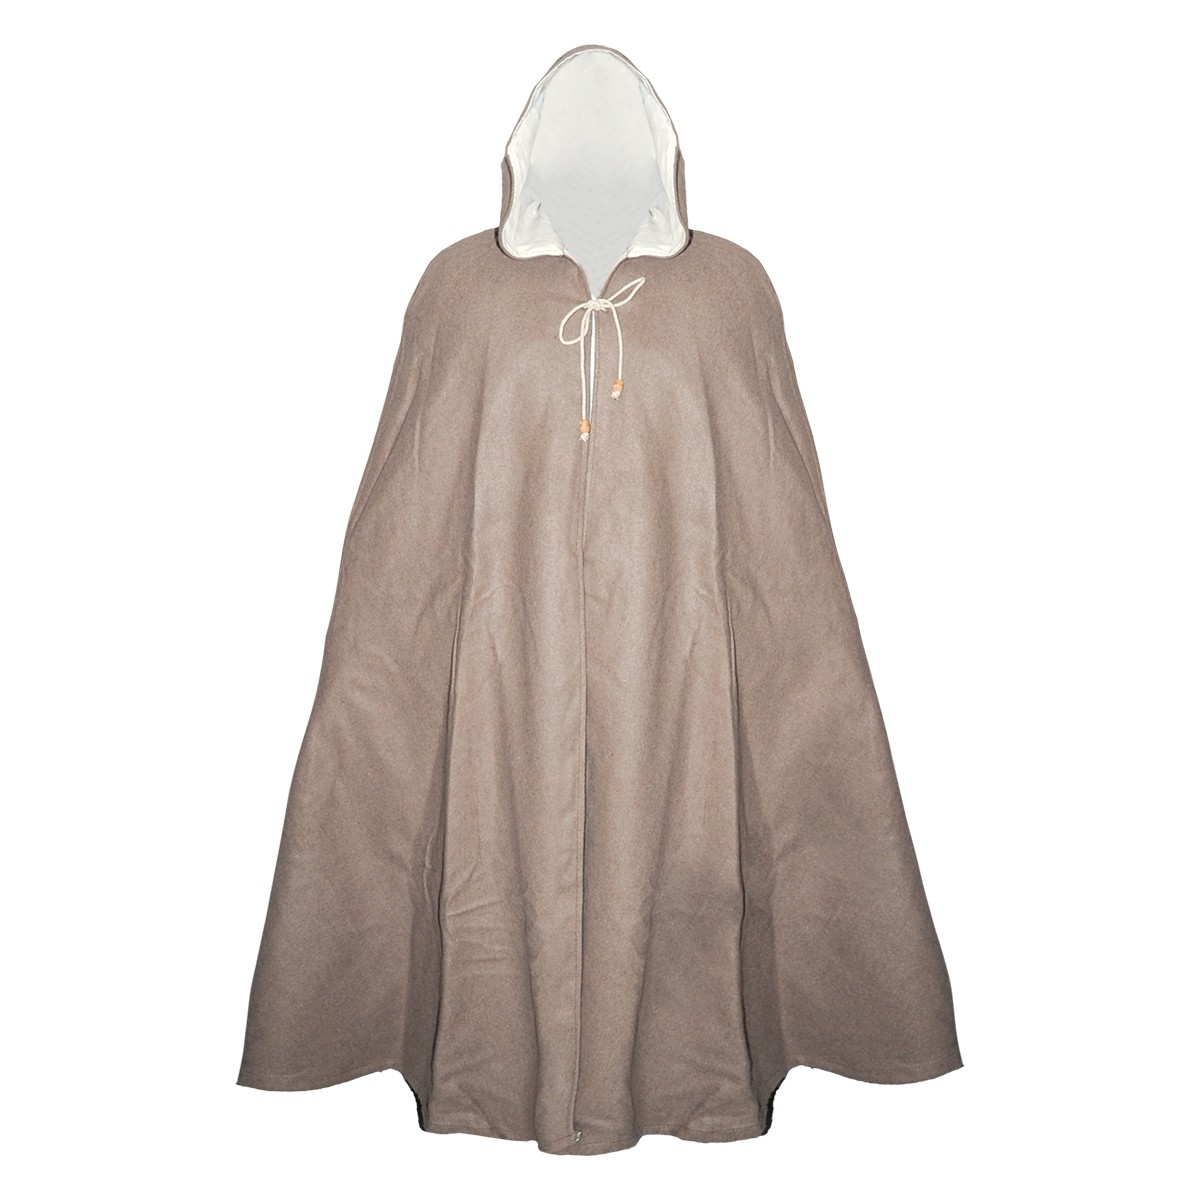 Natural Brown Medieval Hooded Cloak - Authentic Woolen and 100% Linen Lining Cape